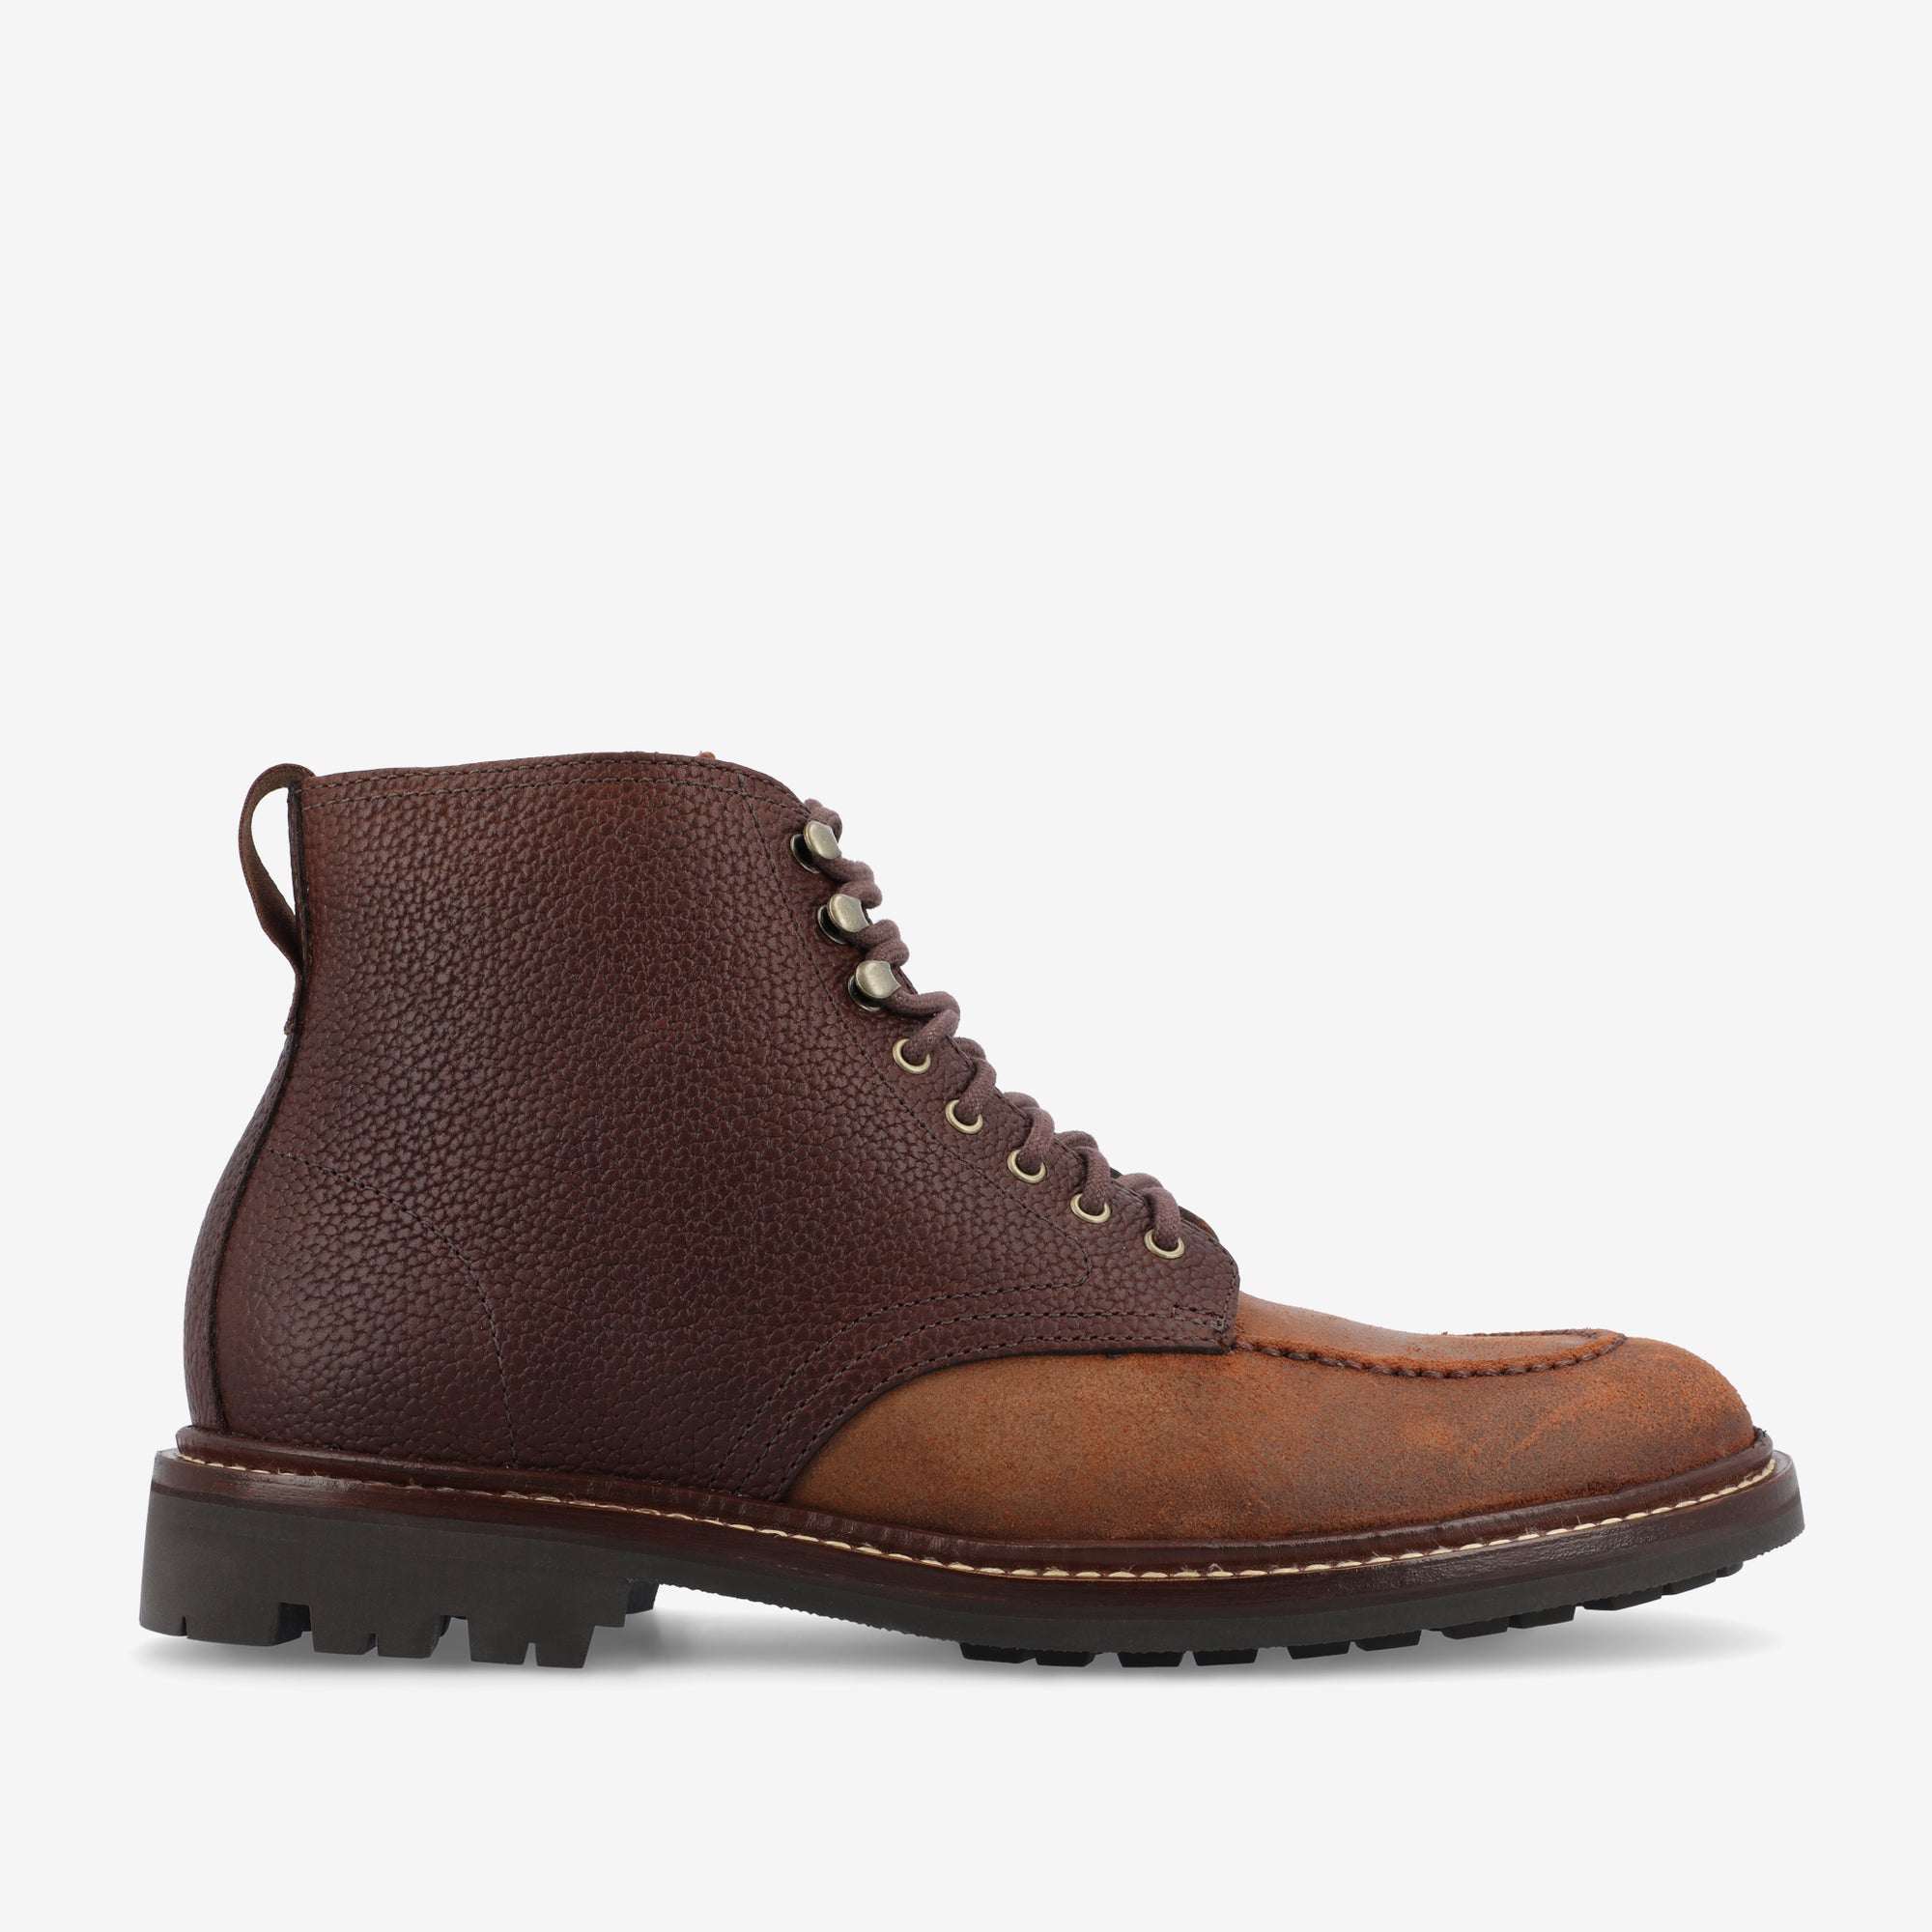 The Darcey Boot in Brown